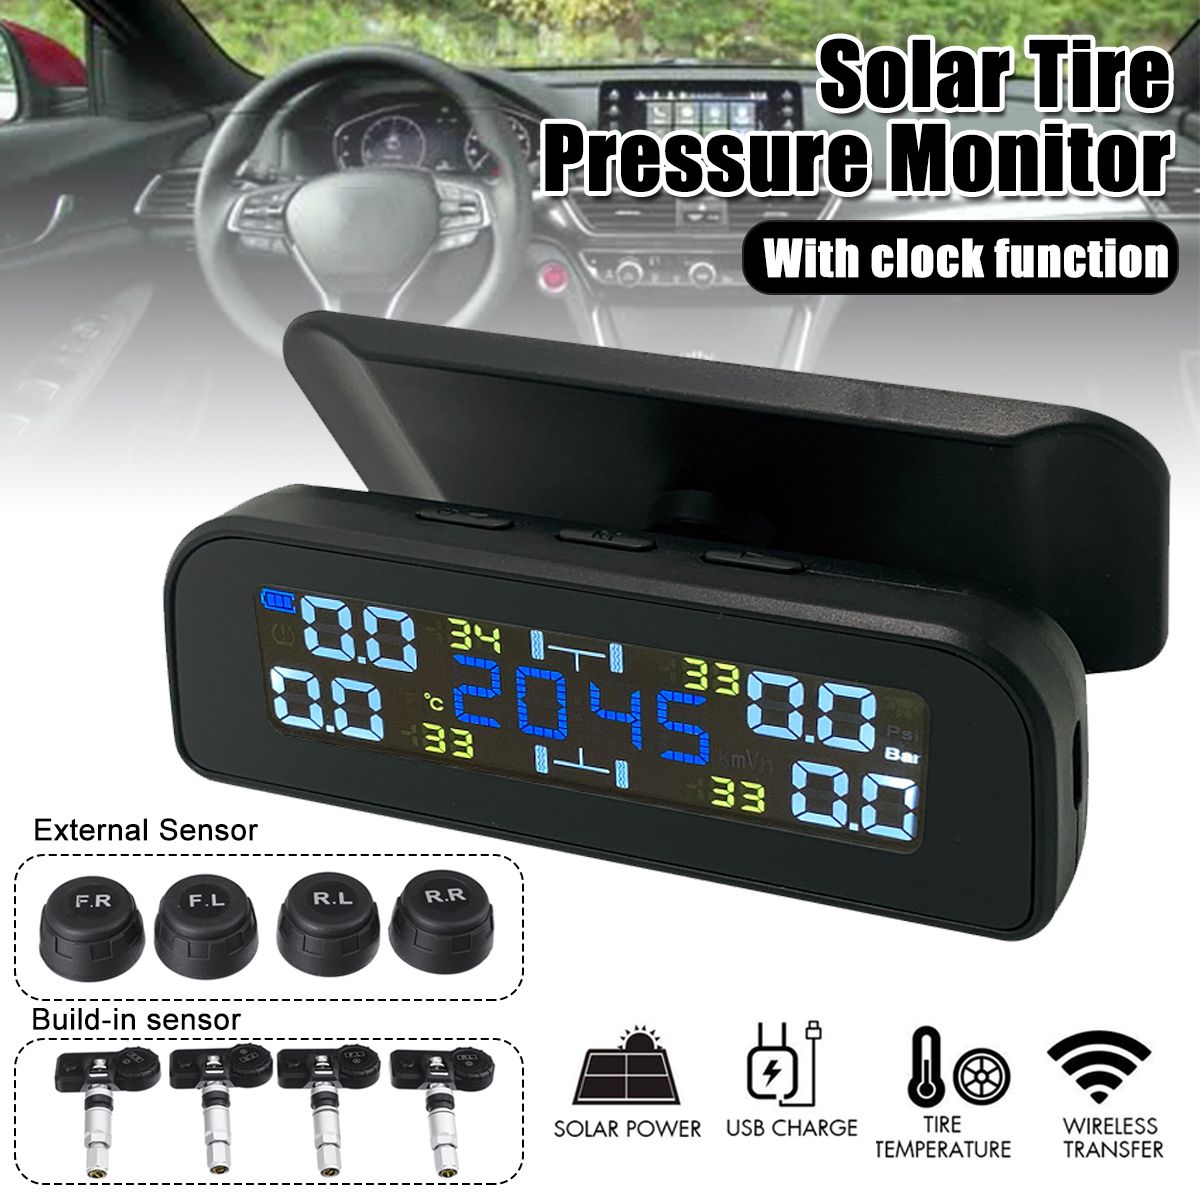 TPMS-Wireless-Tire-Pressure-Monitoring-System-Solar-Power-Clock-LCD-Display-1744859